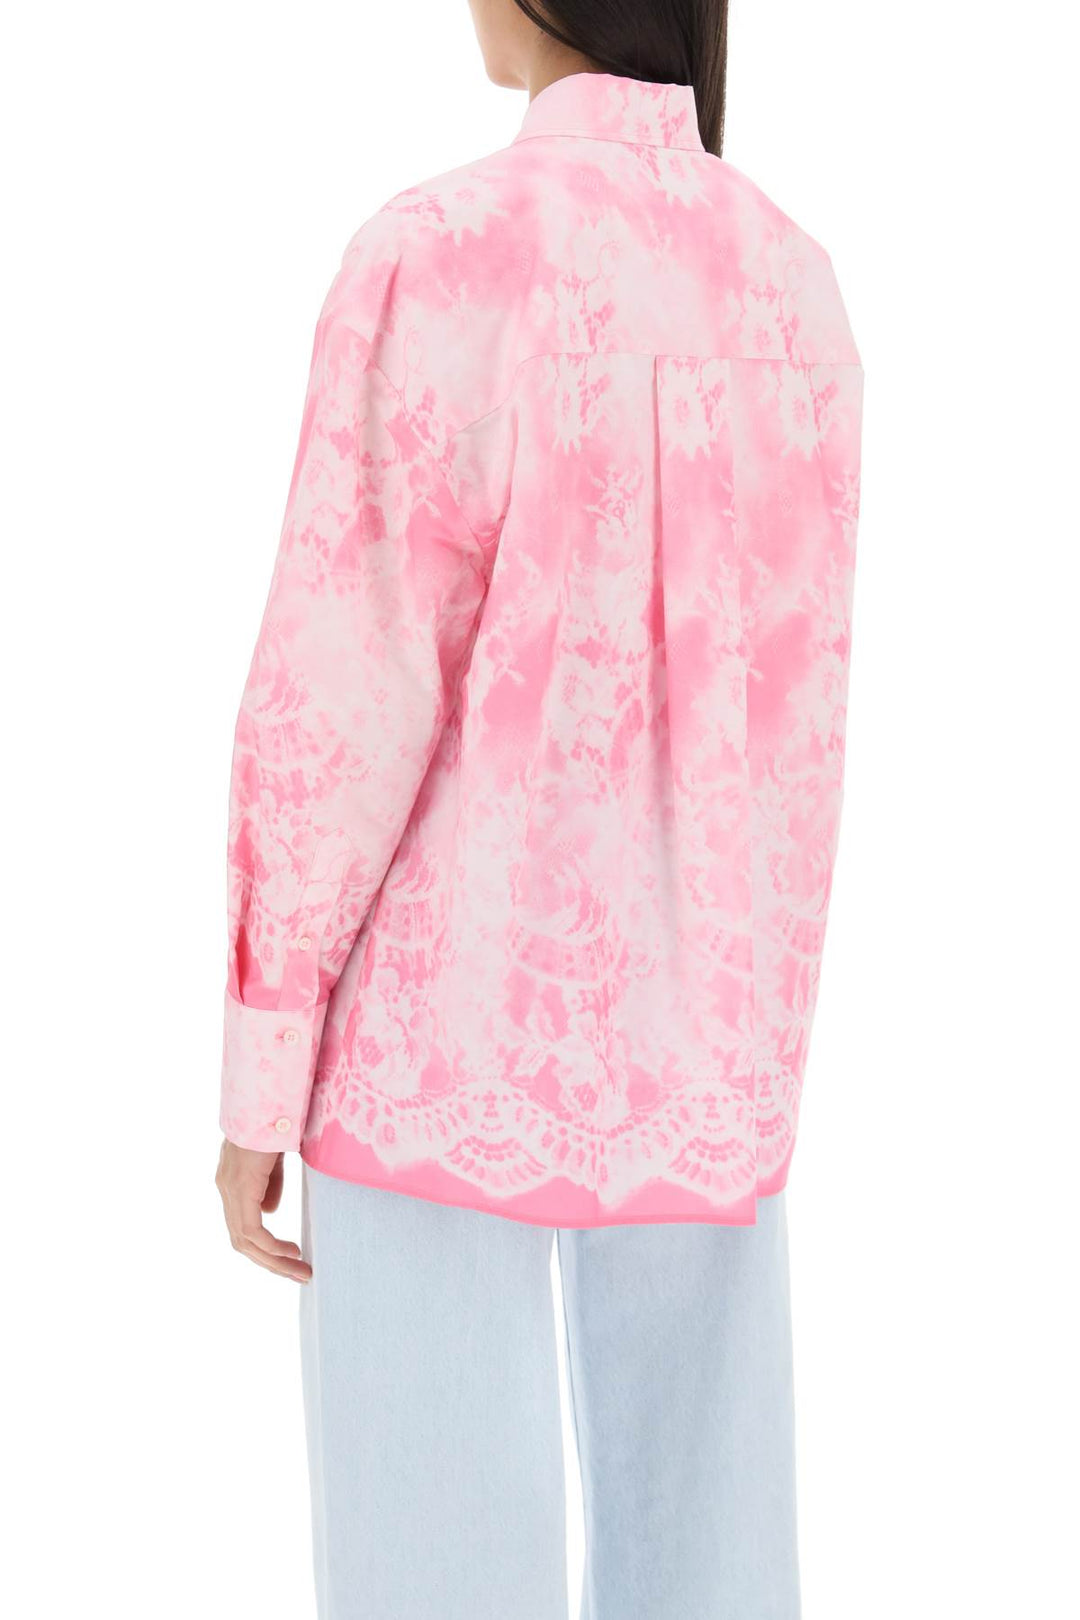 Msgm Oversized Shirt With All Over Print   Rosa